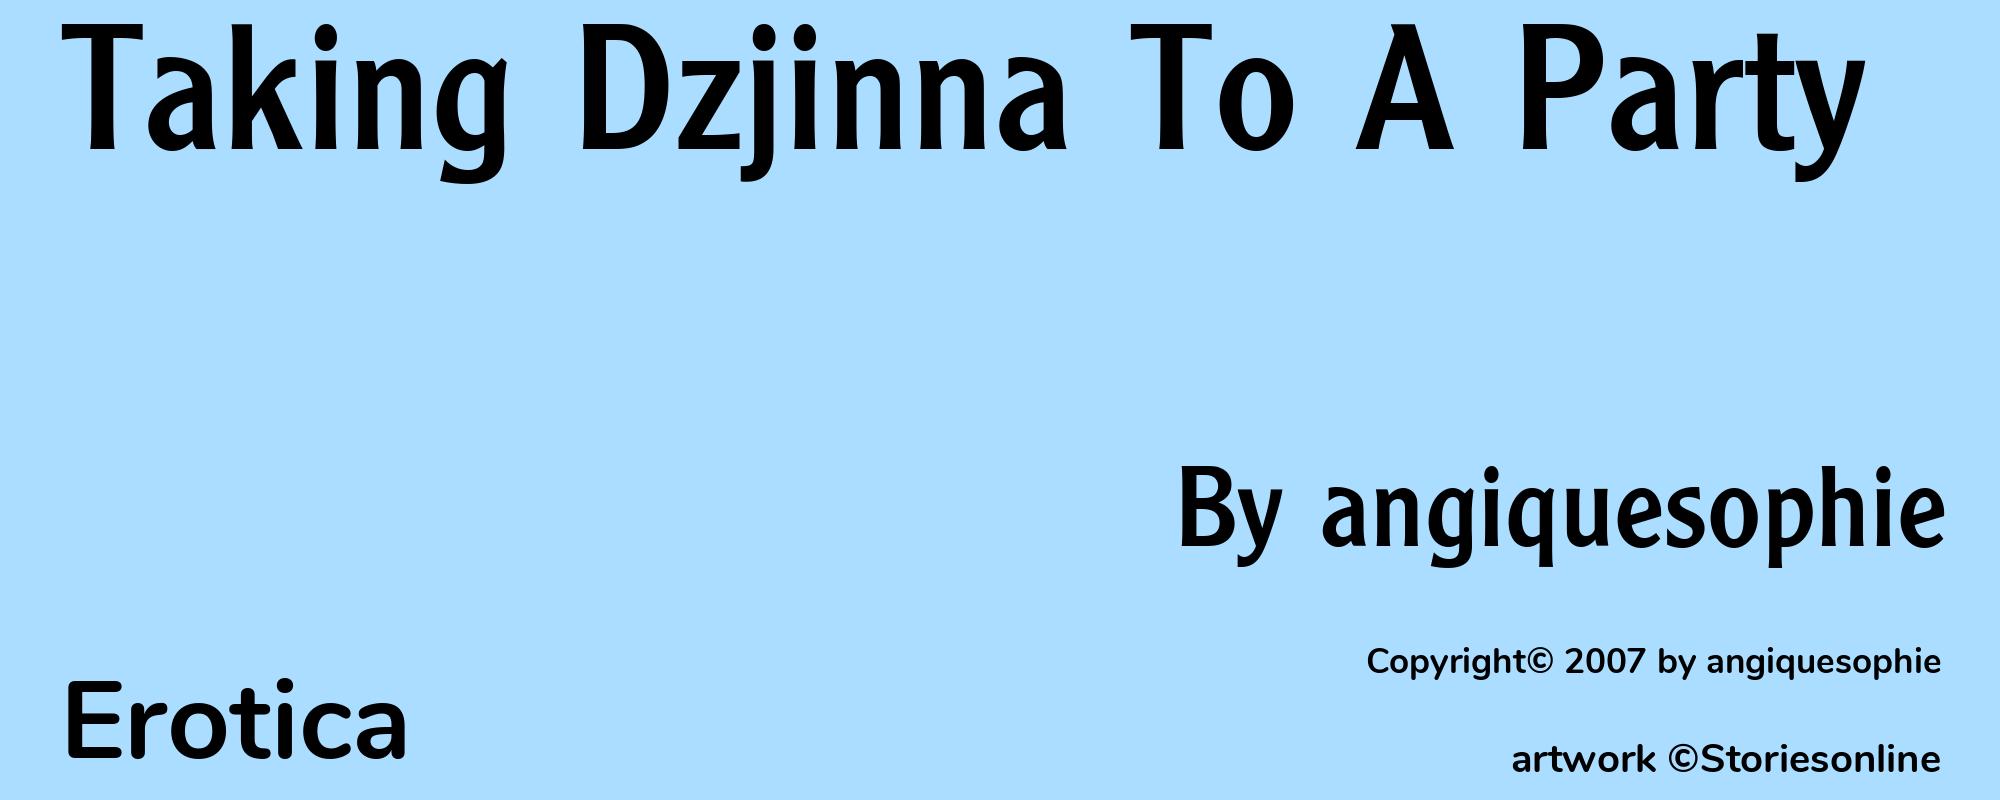 Taking Dzjinna To A Party - Cover